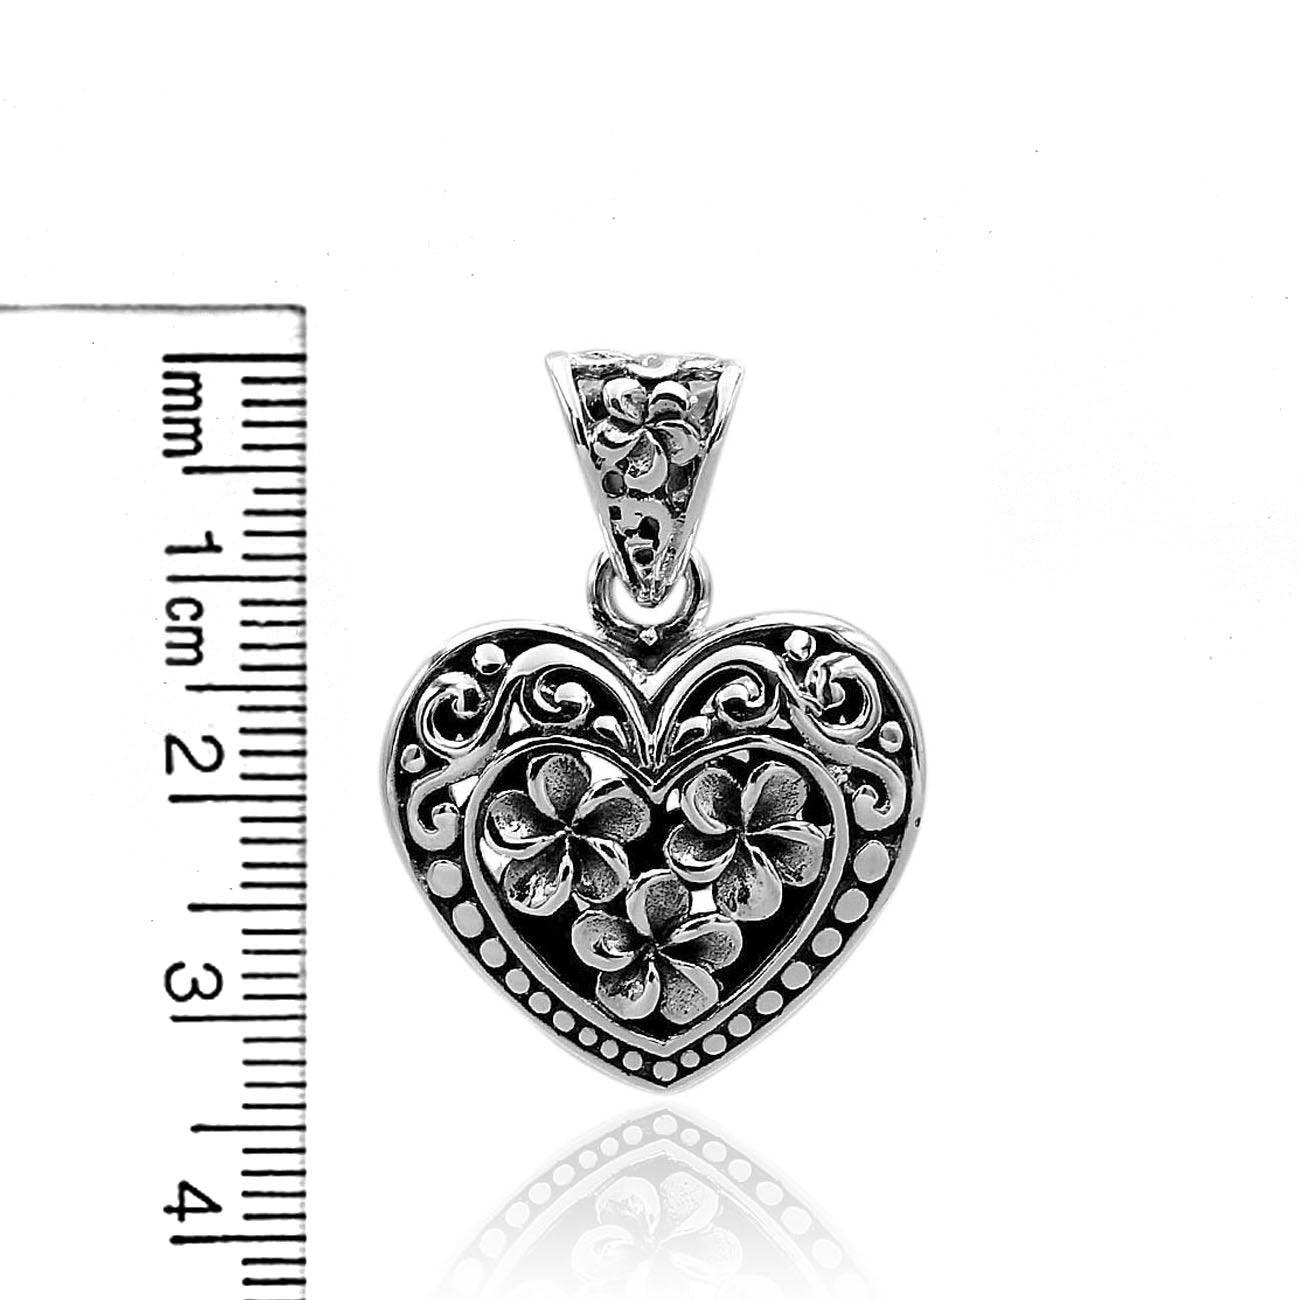 Handmade Floral HEART Charm Pendant Necklace in 925 Sterling Silver With Chain - 3.3 Cm - Inspiring Jewellery